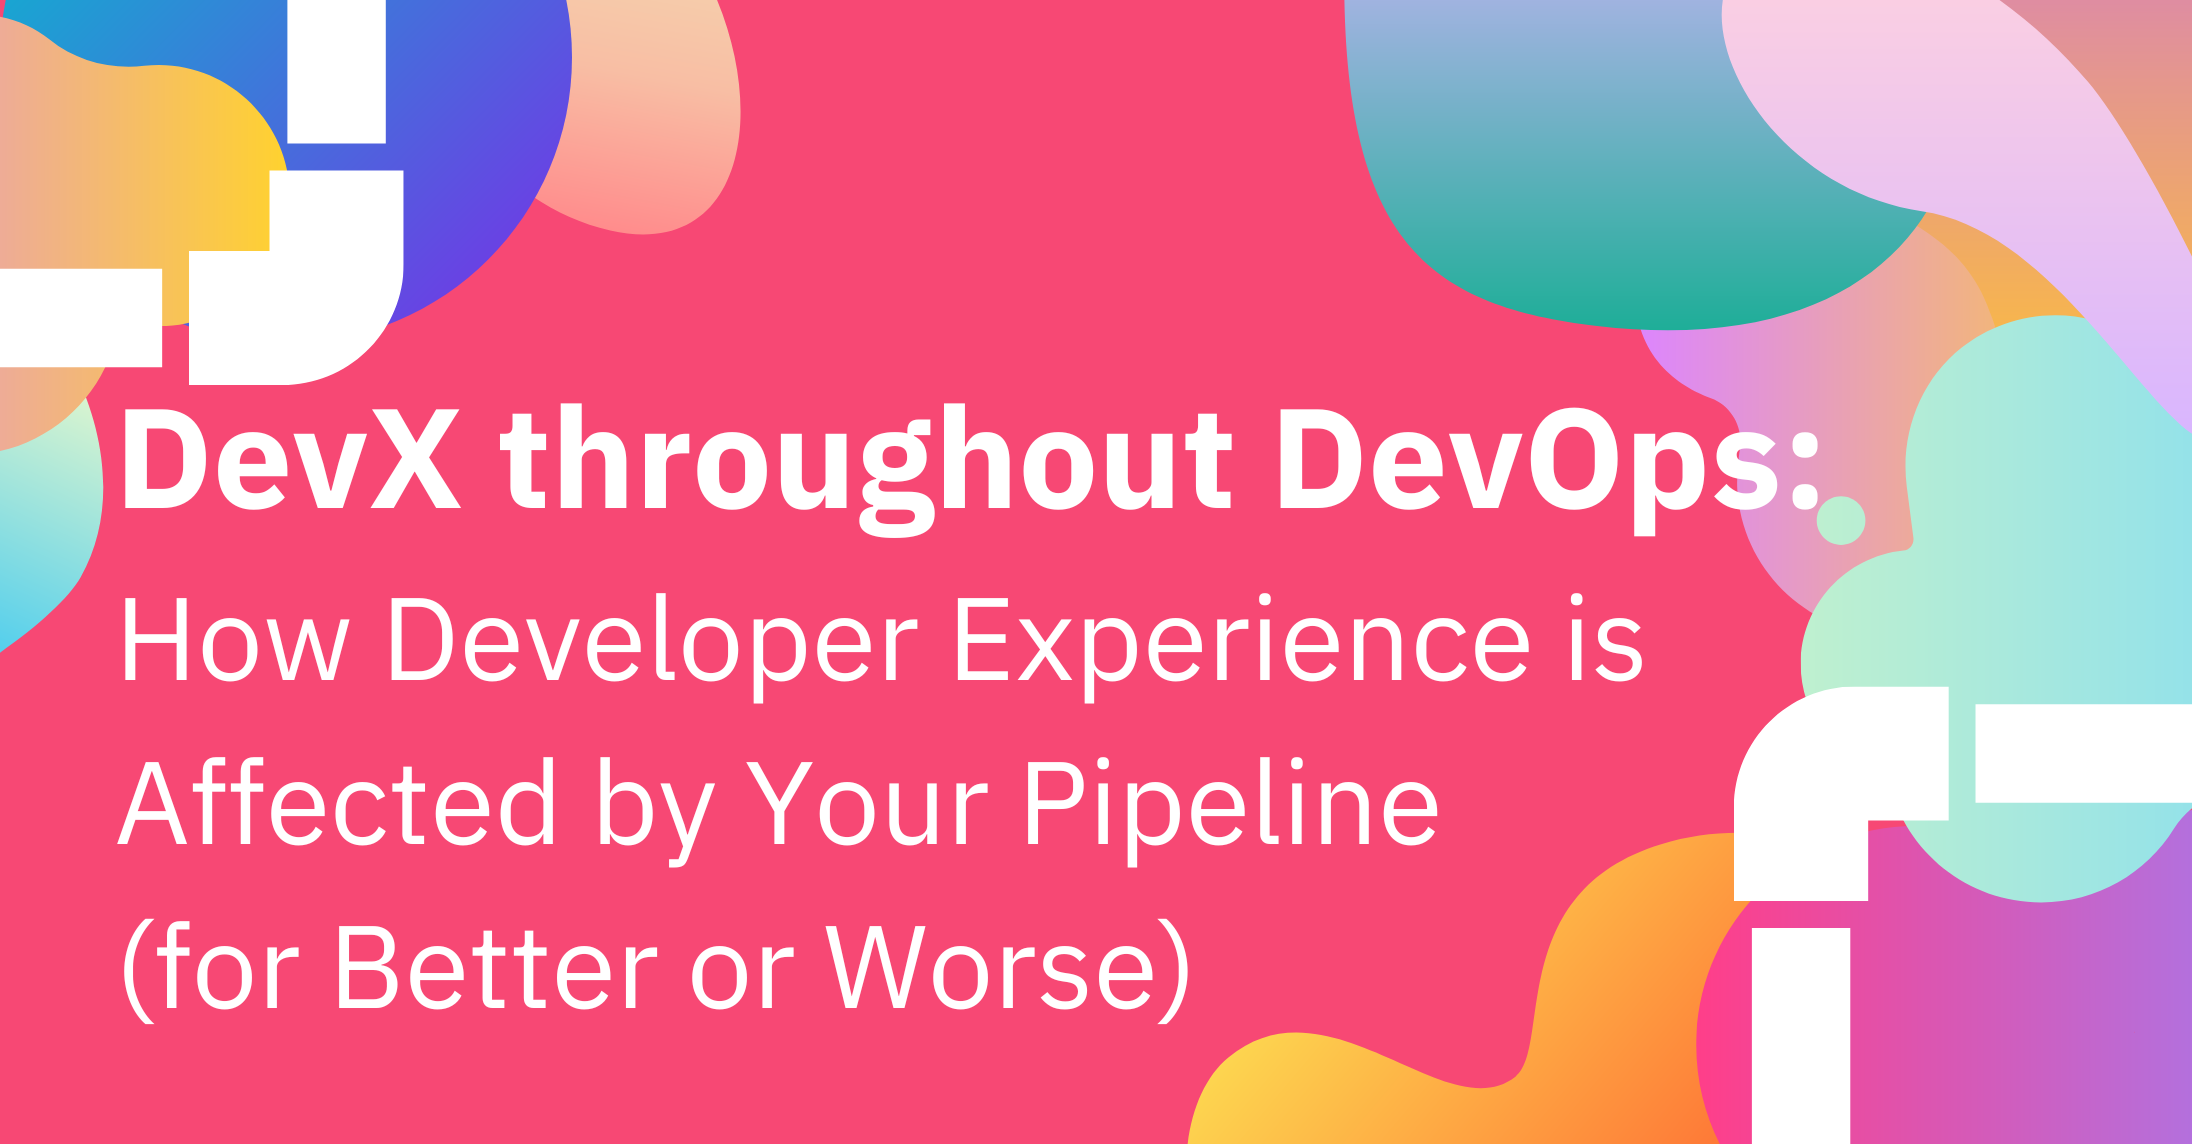 DevX throughout DevOps: How Developer Experience is Affected by Your Pipeline (for Better or Worse)